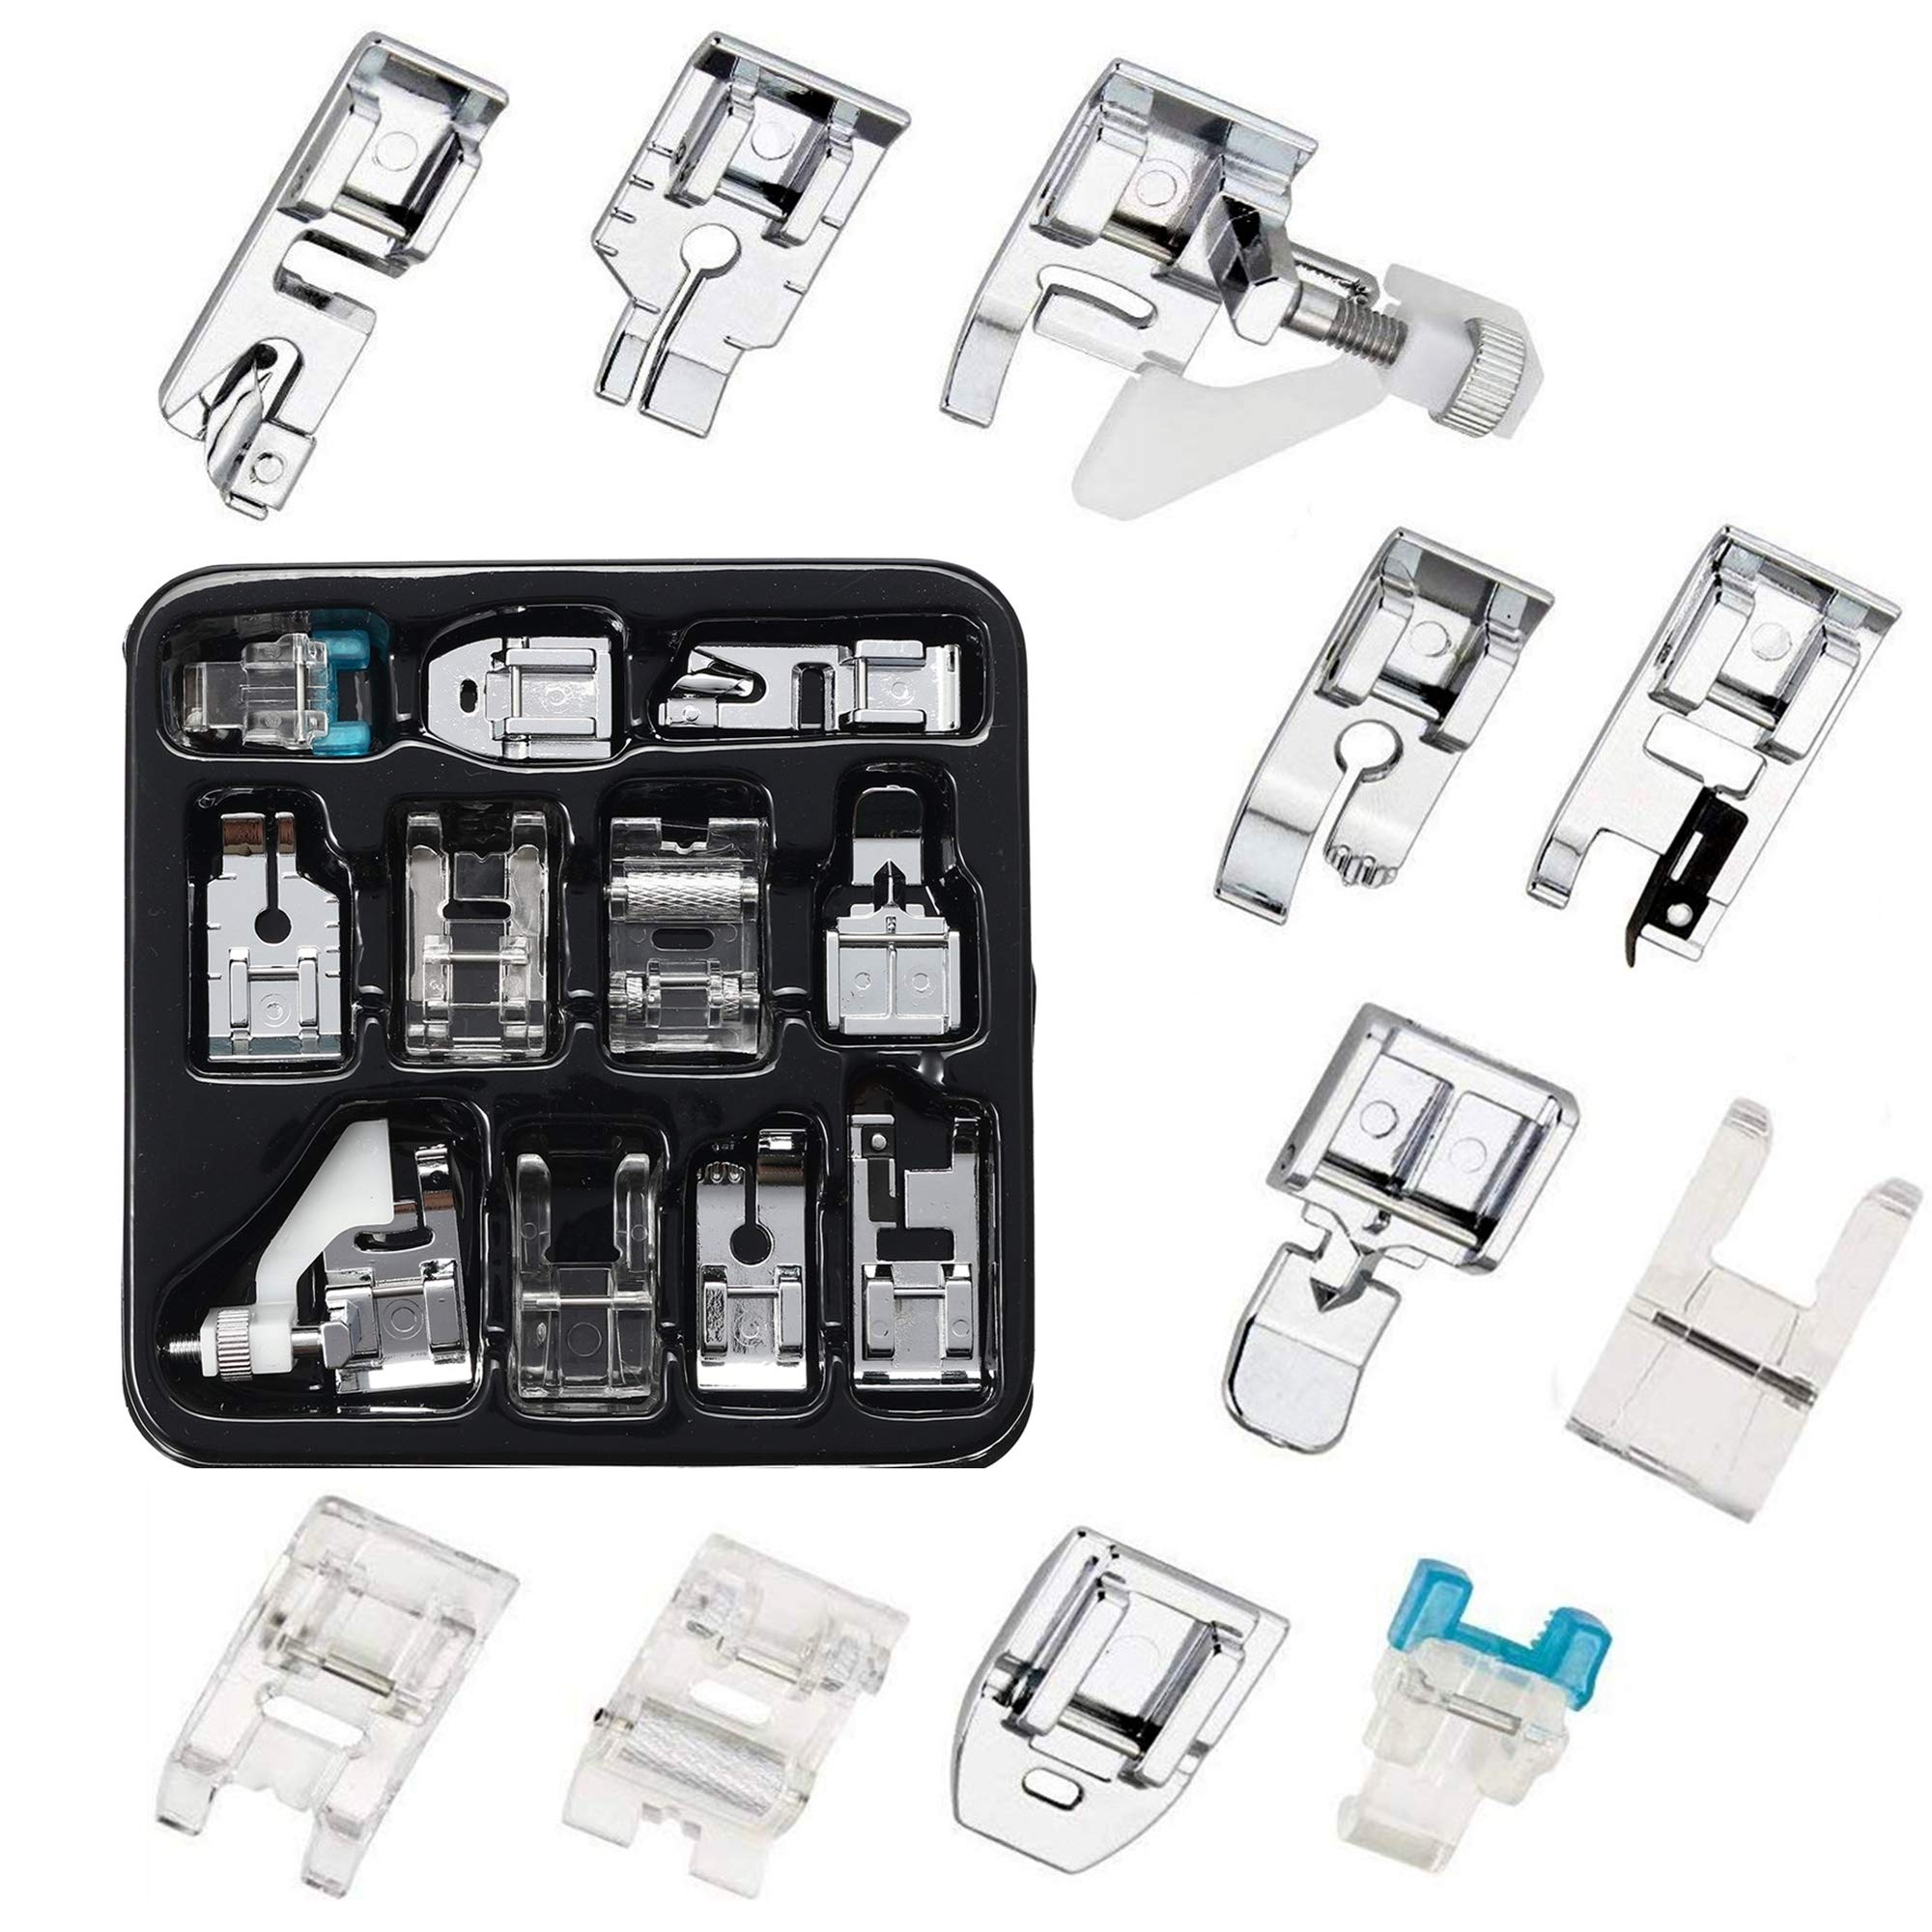 YEQIN 11 Pcs Sewing Machine Presser Feet Set for Low Shank Snap-On